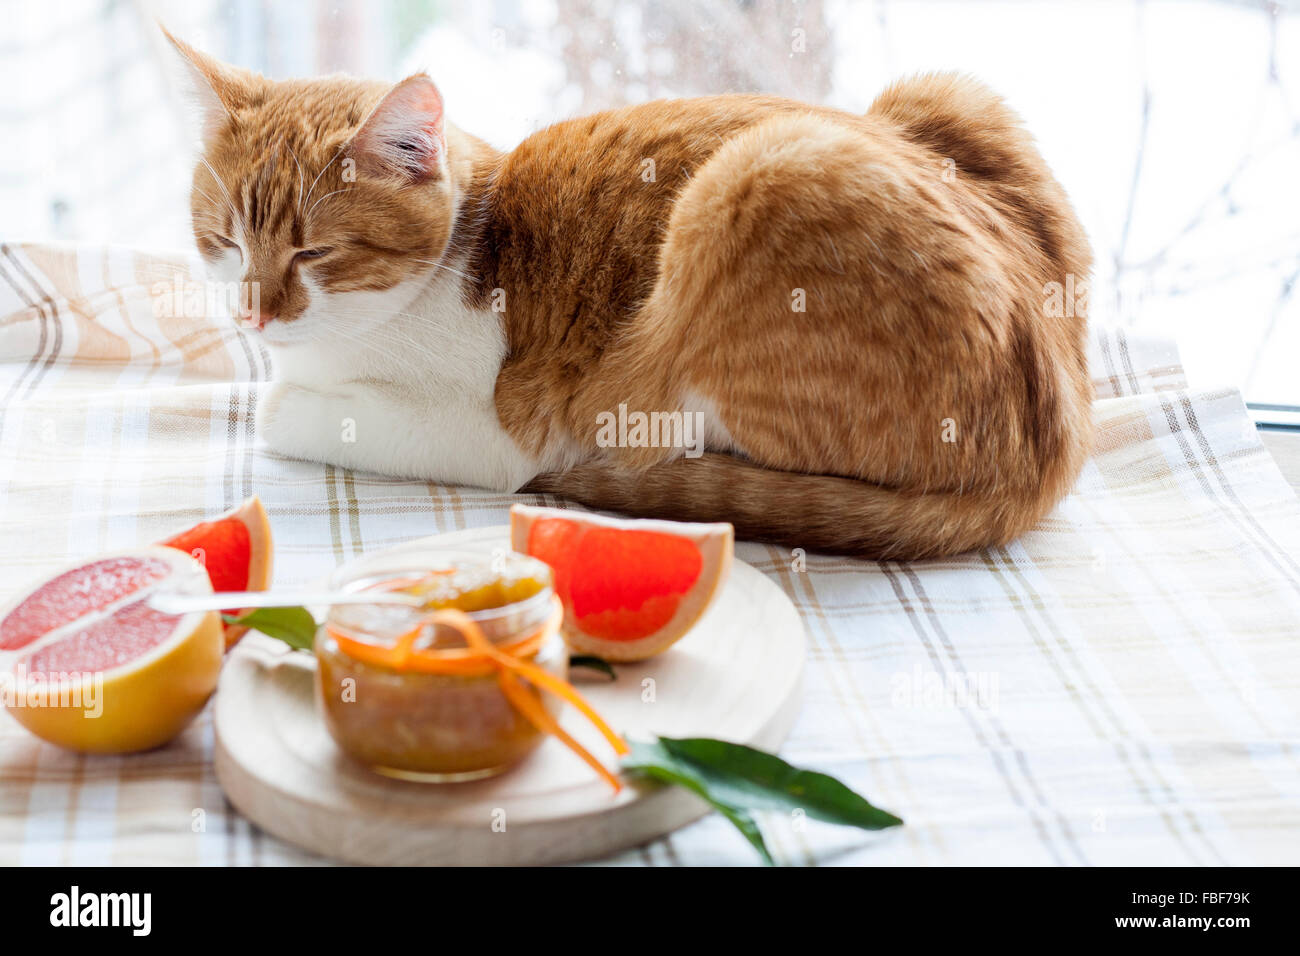 The red cat and orange jam in glass jar, selective focus. Stock Photo